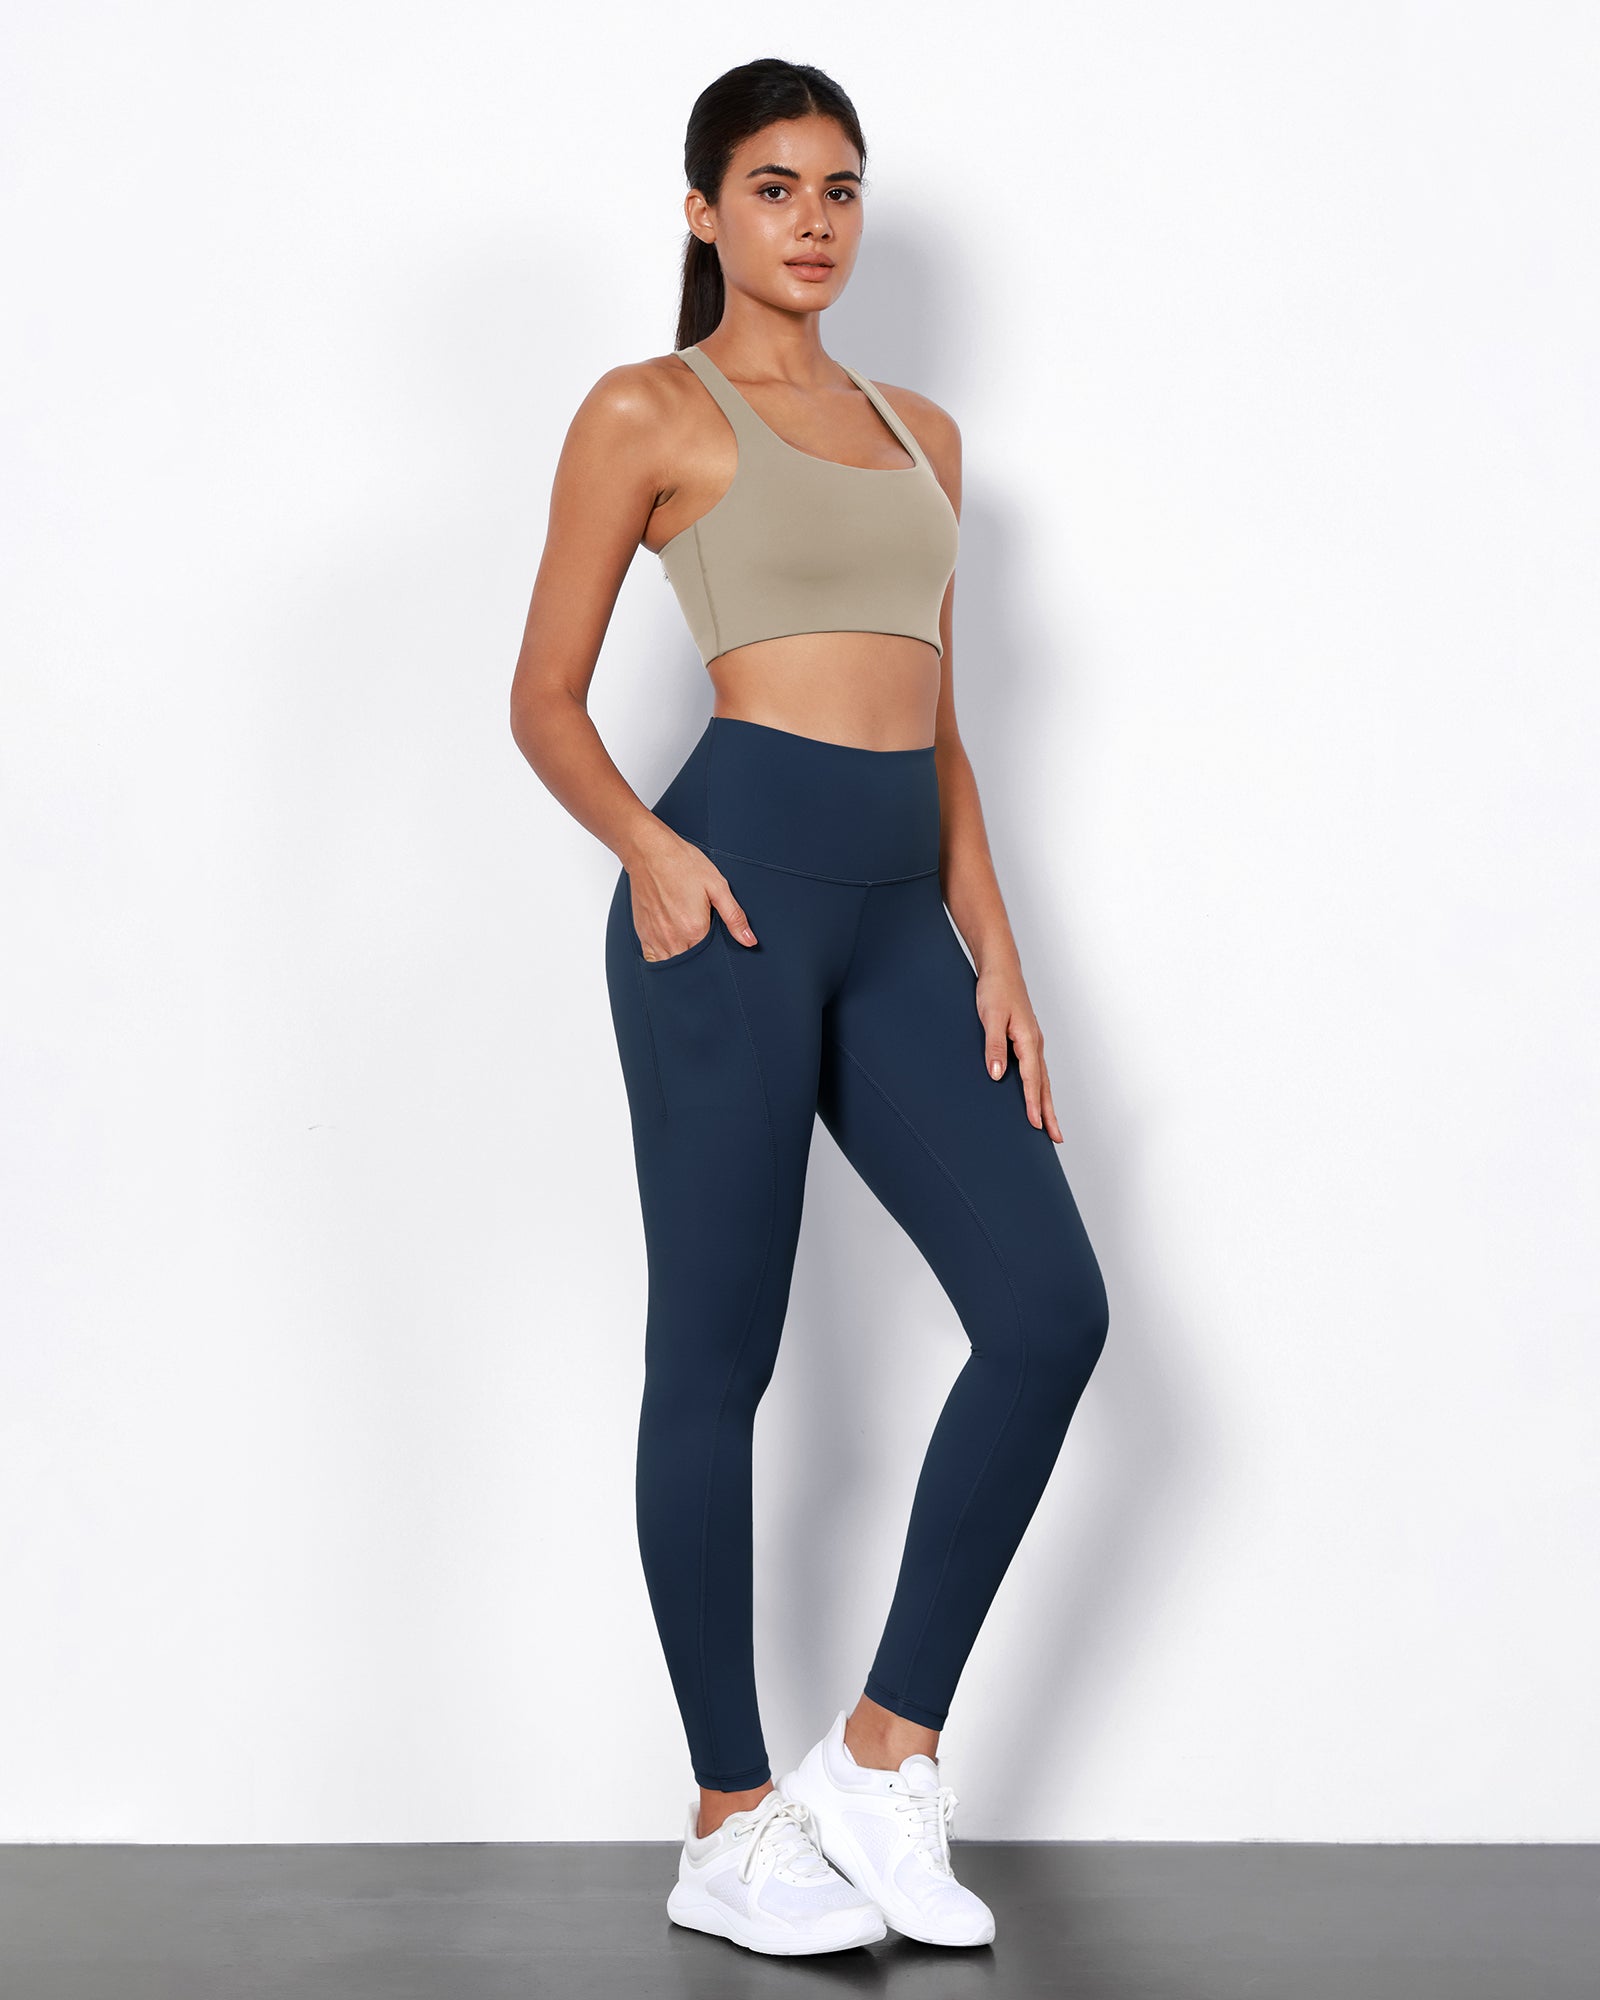 2-Pack 28" High Waist Workout Leggings with Pockets Black+Navy - ododos